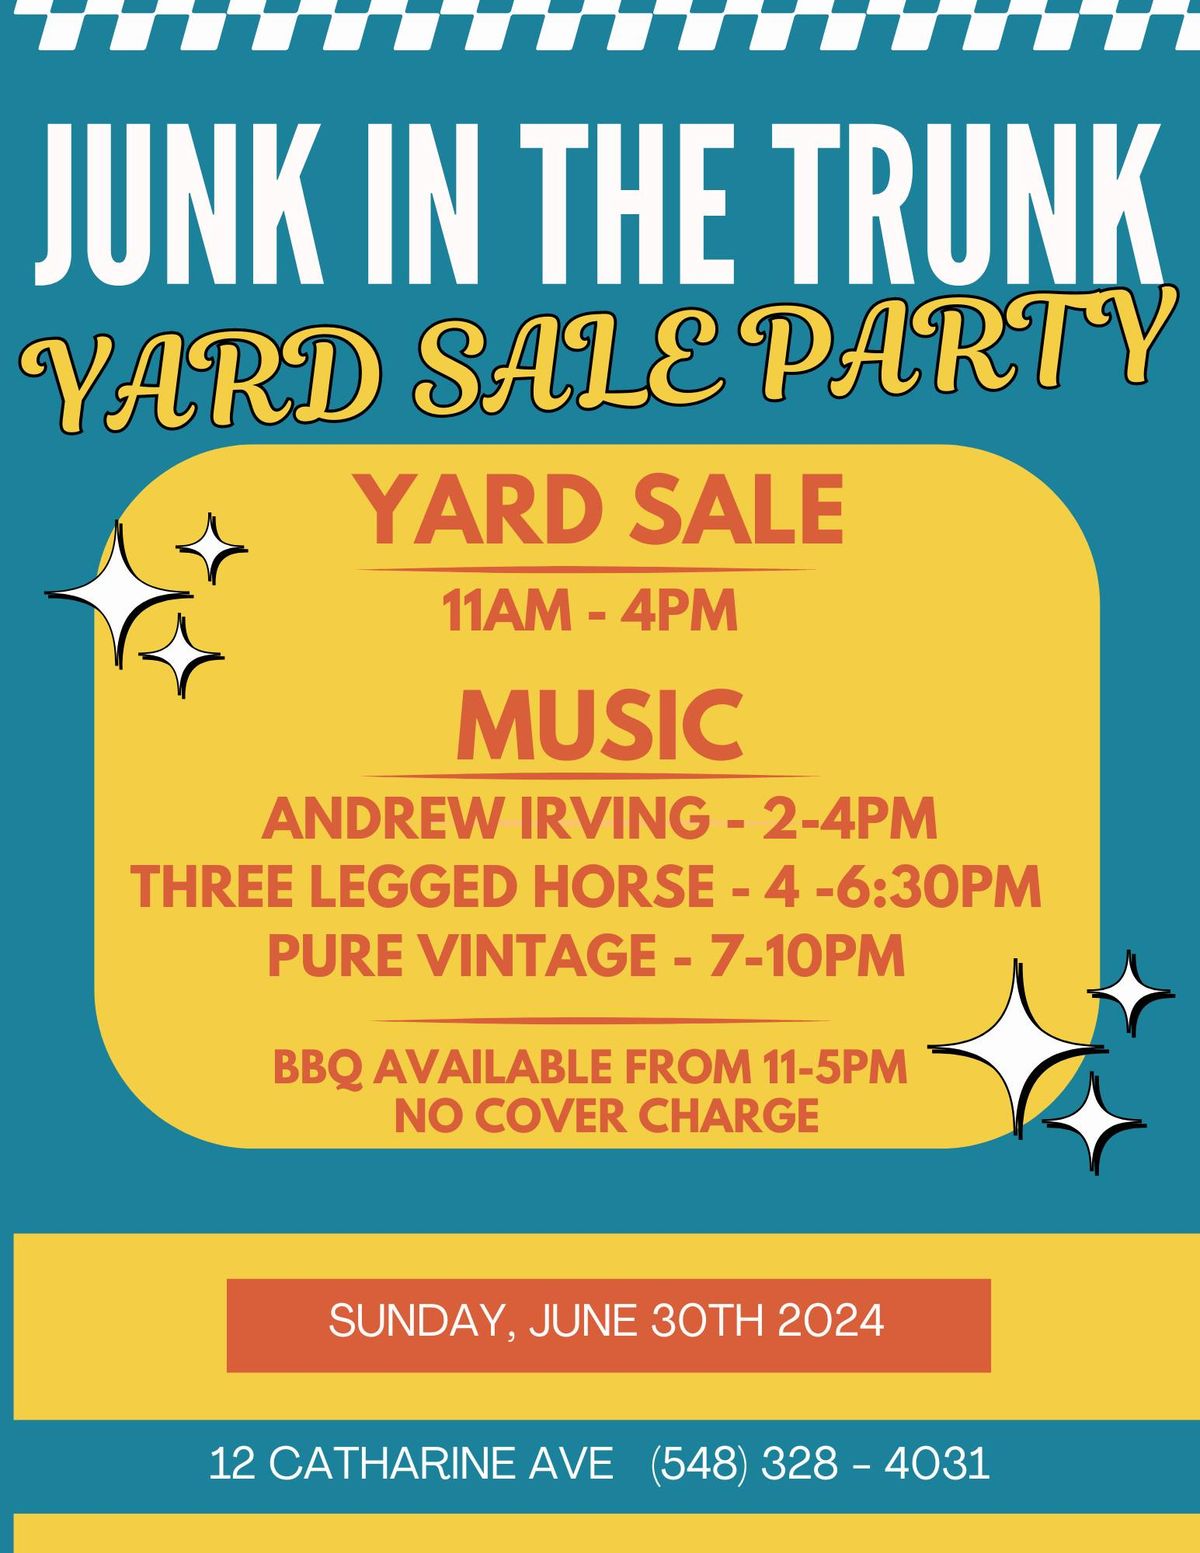 JUNK IN THE TRUNK - Yard Sale Party with Pure Vintage, Three Legged Horse, and Andrew Irving